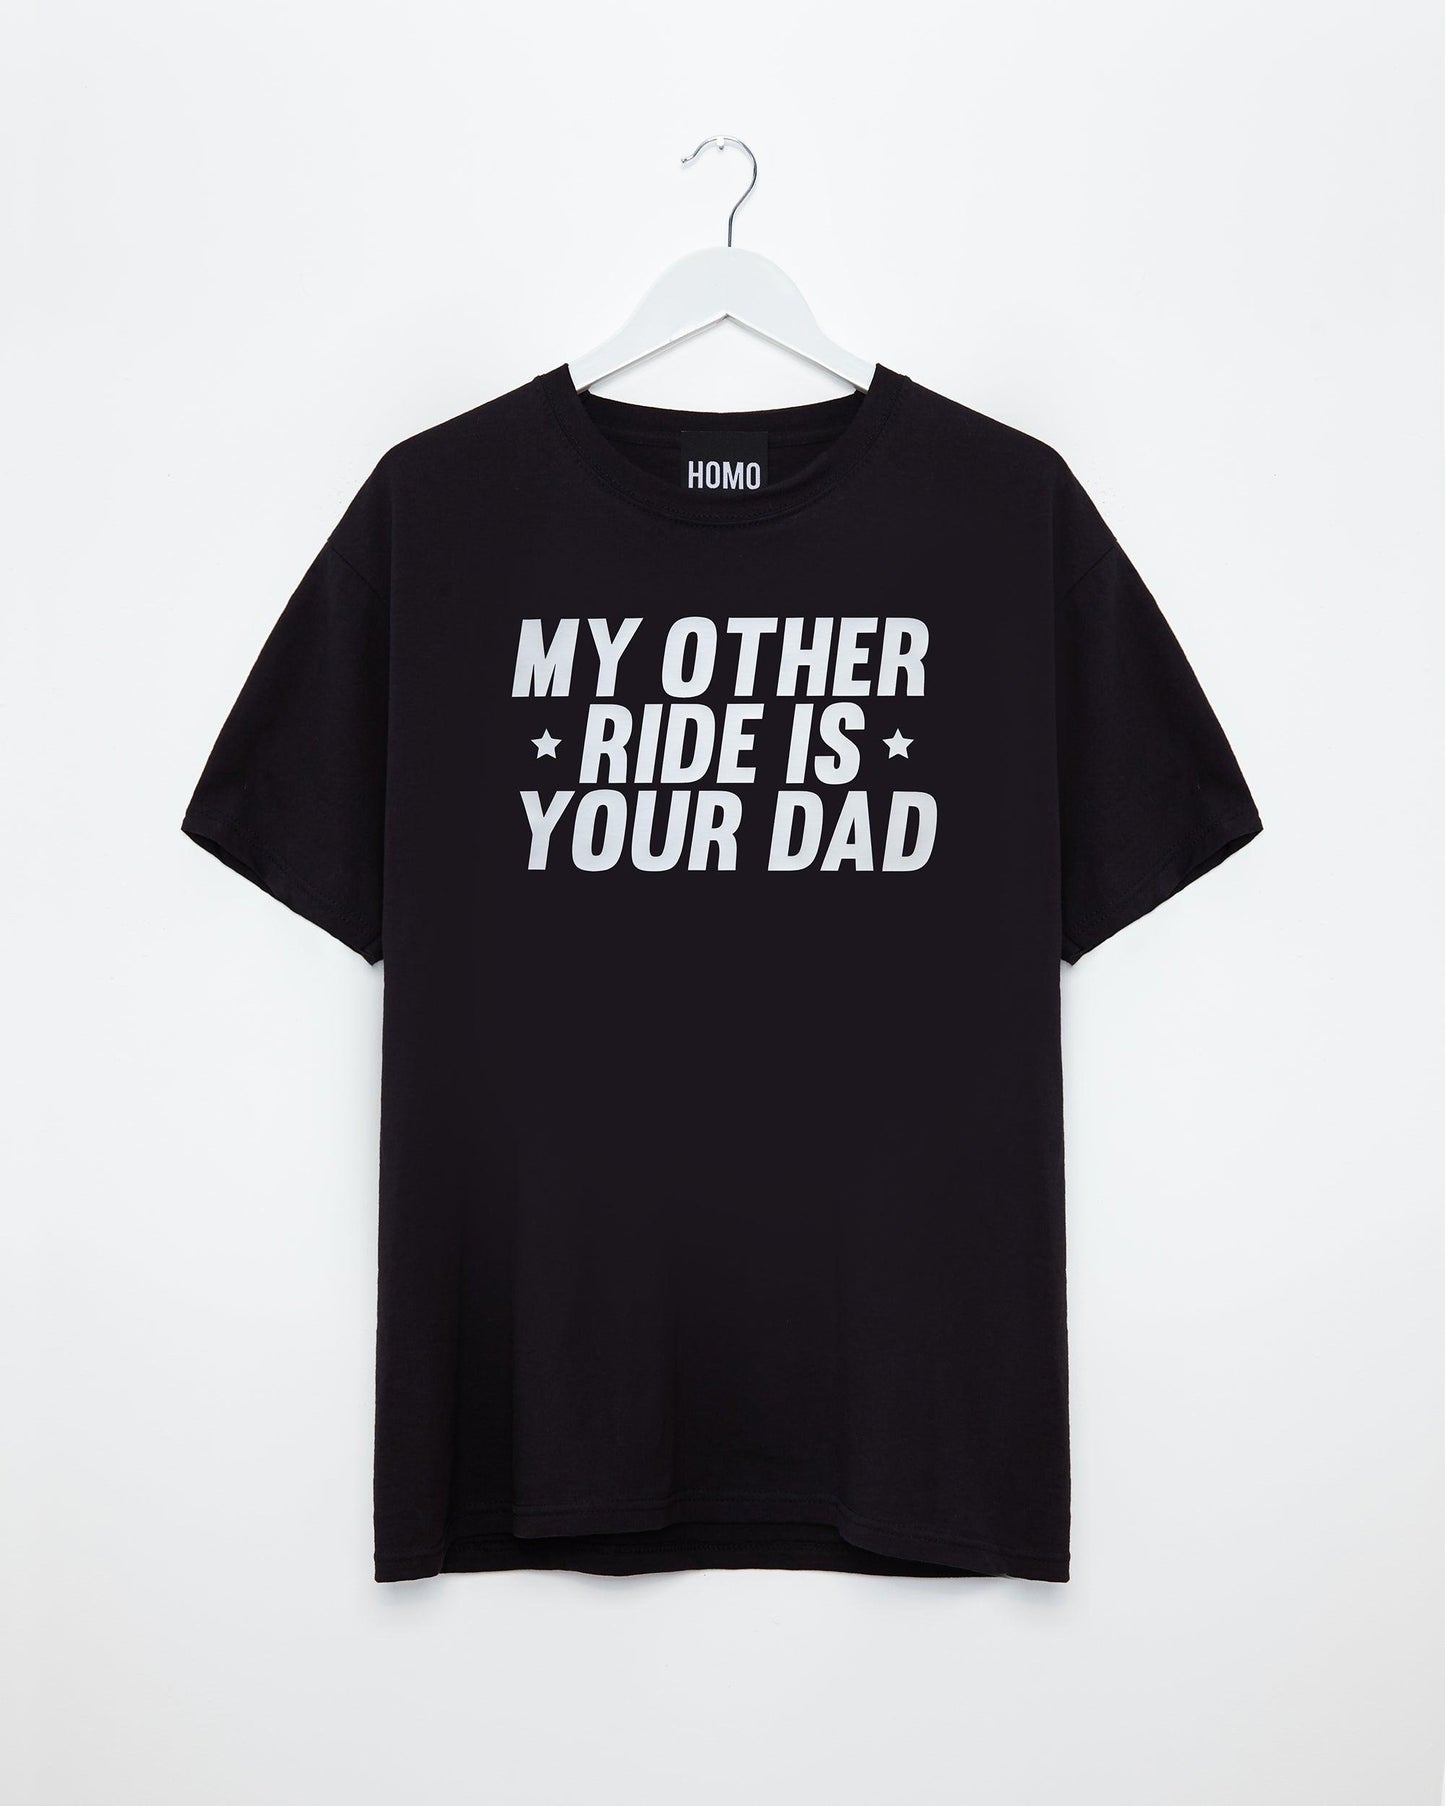 My other ride is your dad, glossy white on black - tee